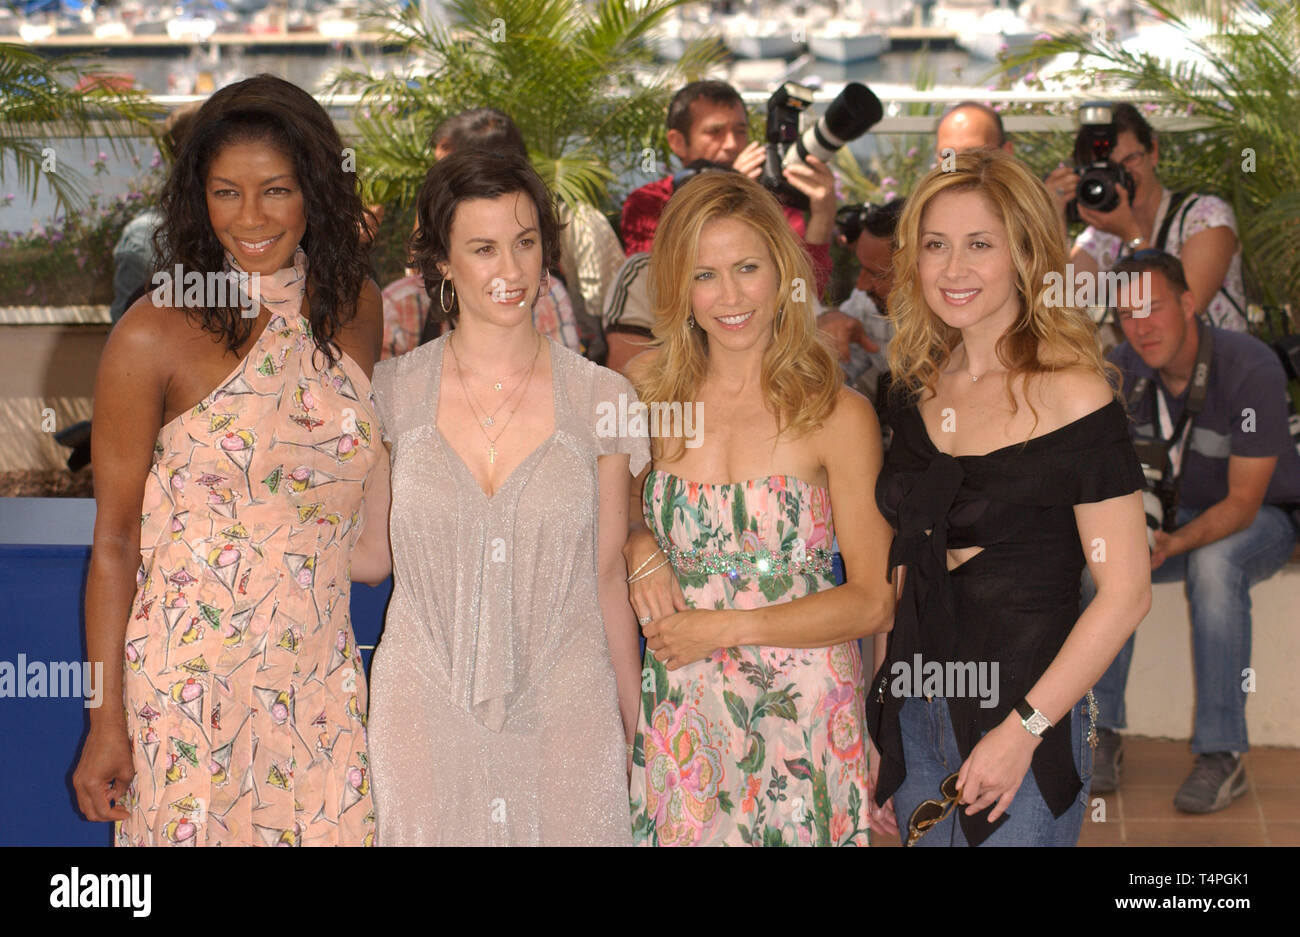 CANNES, FRANCE. May 22, 2004: NATALIE COLE (left), ALANIS MORISSETTE, SHERYL CROW & LARA FABIAN at photocall for their new movie De-Lovely which is the closing film of the 57th Festival de Cannes. Stock Photo